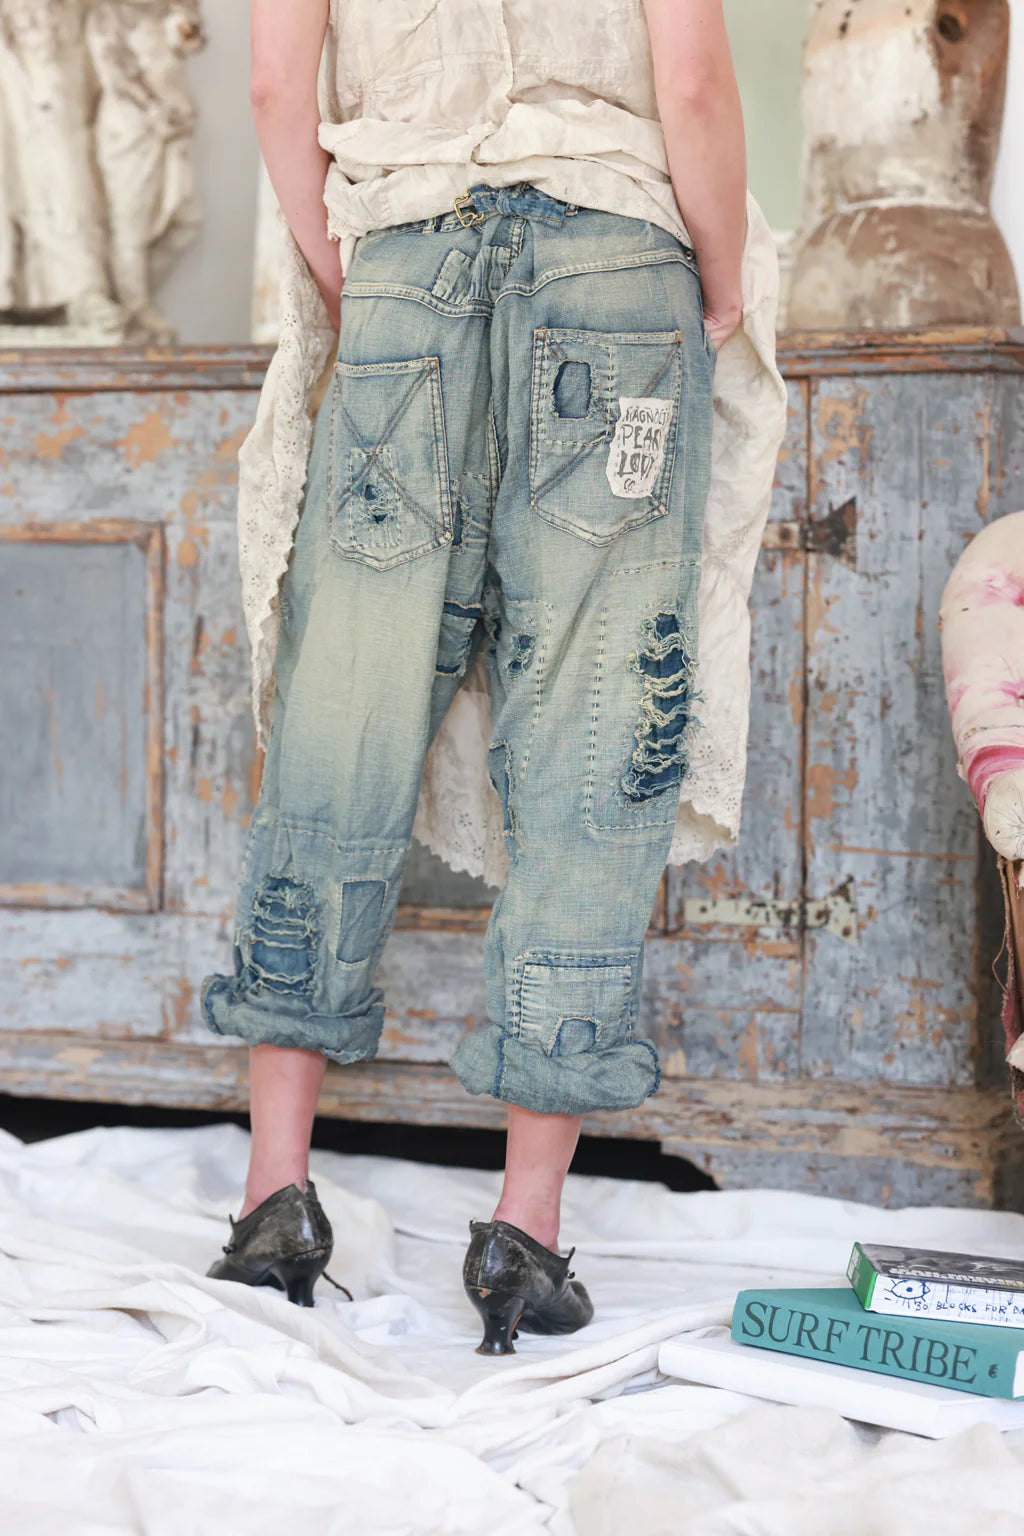 Miner Denims in Washed Indigo by Magnolia Pearl